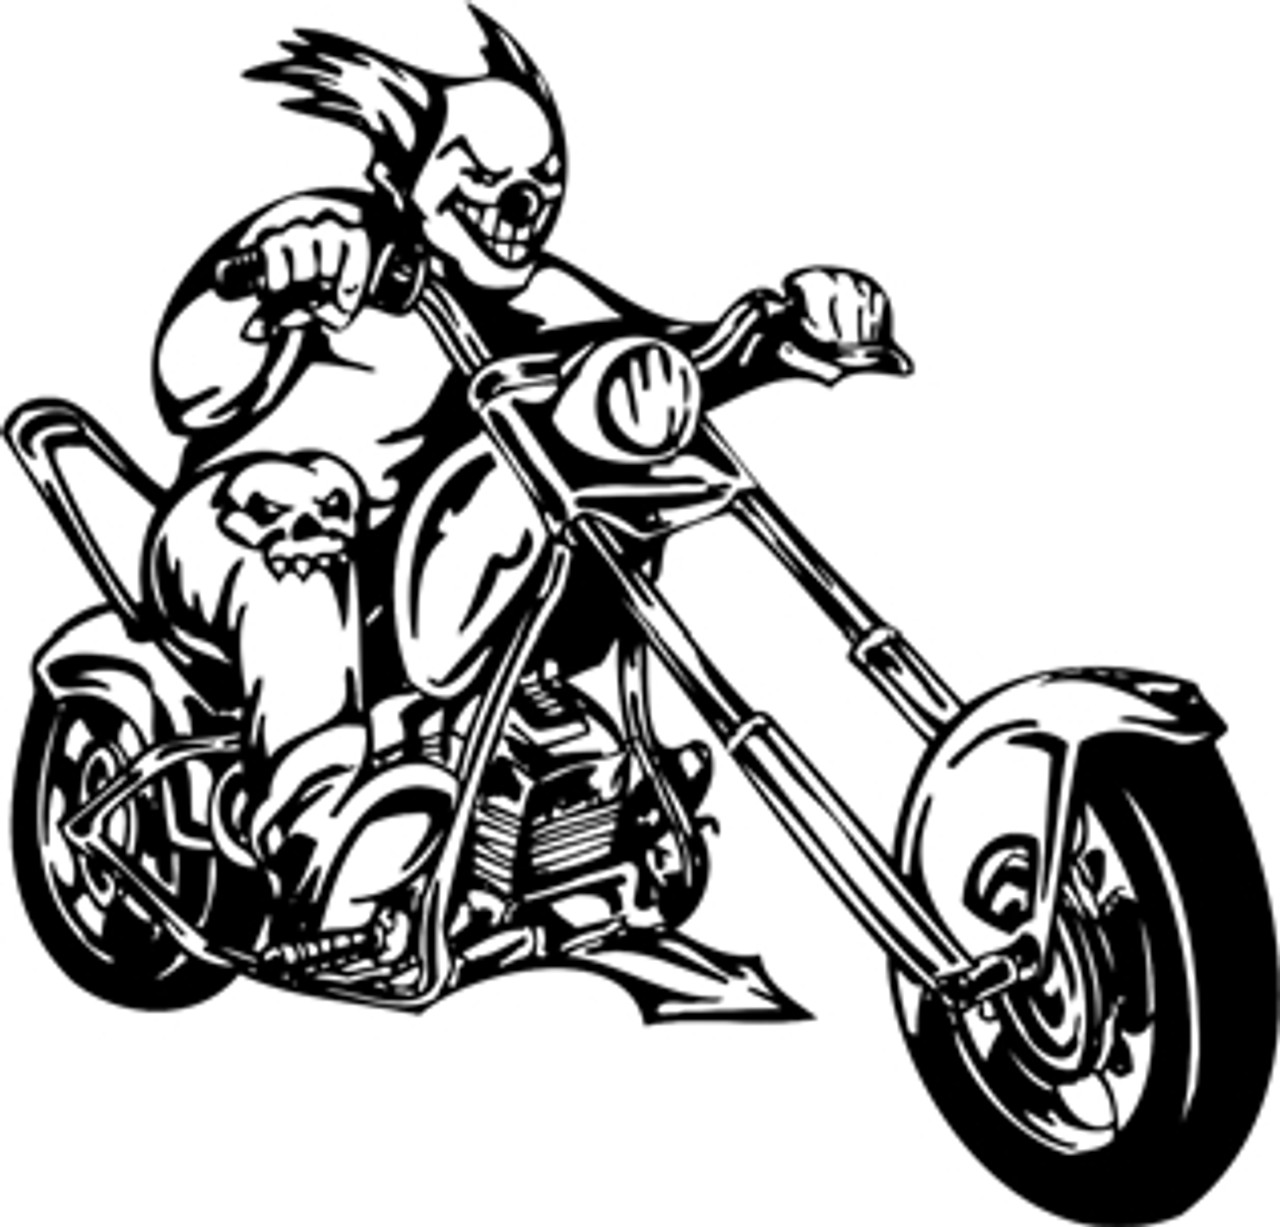 Joker and His Ride Motorcycle Decal